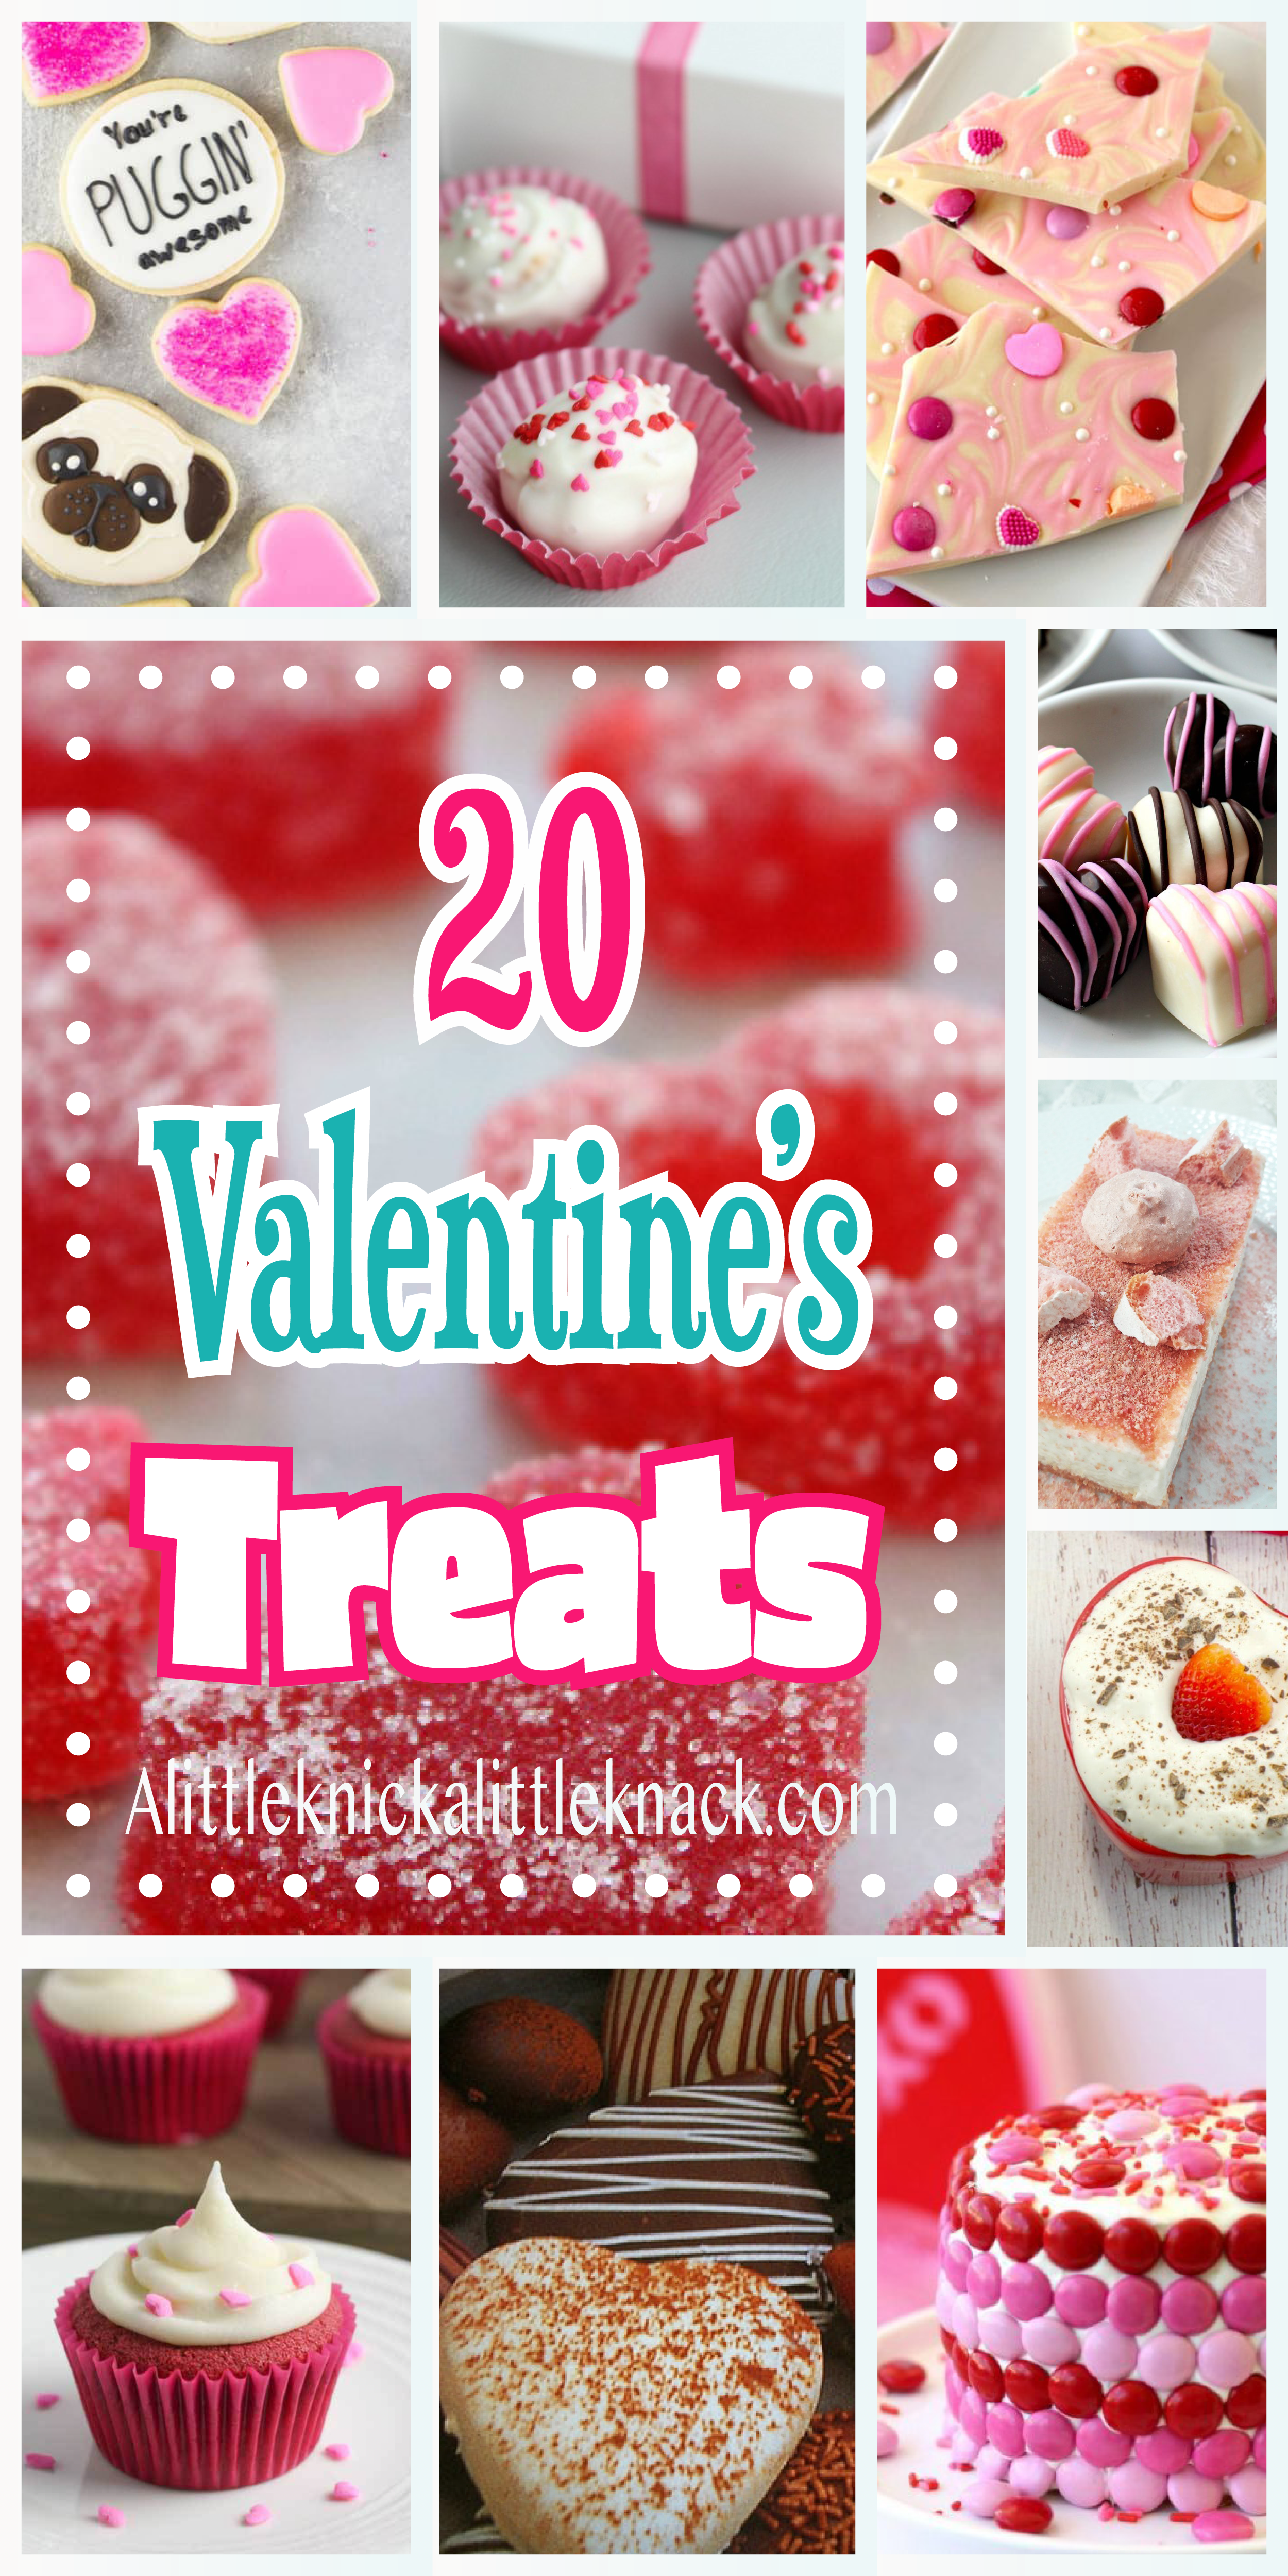 From Chocolate truffle cake to homemade heart gummies this post has all the treats to make your Valentine’s day a bit sweeter! #baking